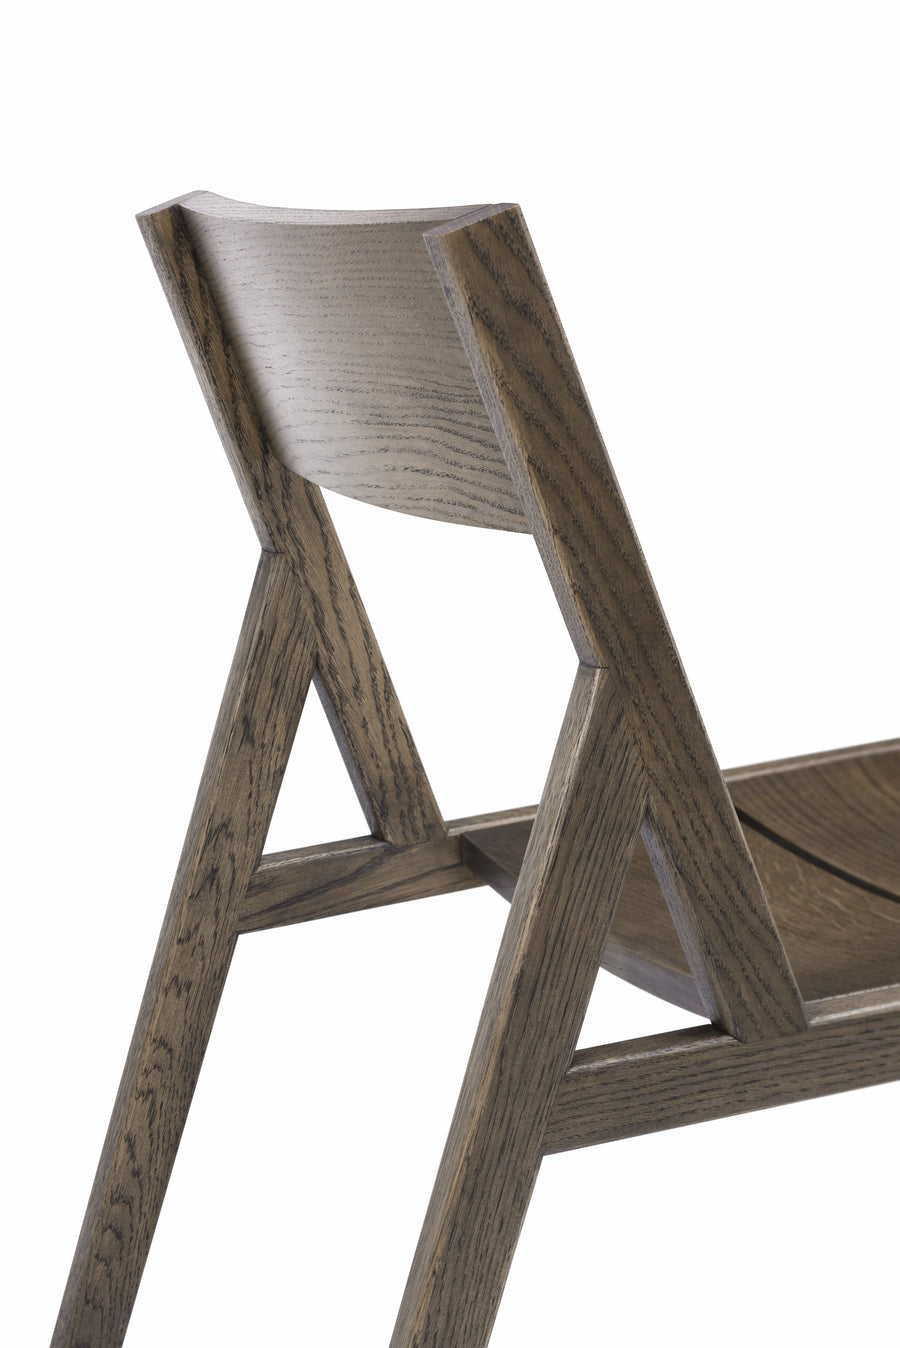 98.6°F OUTDOOR (ARMLESS) DINING CHAIR